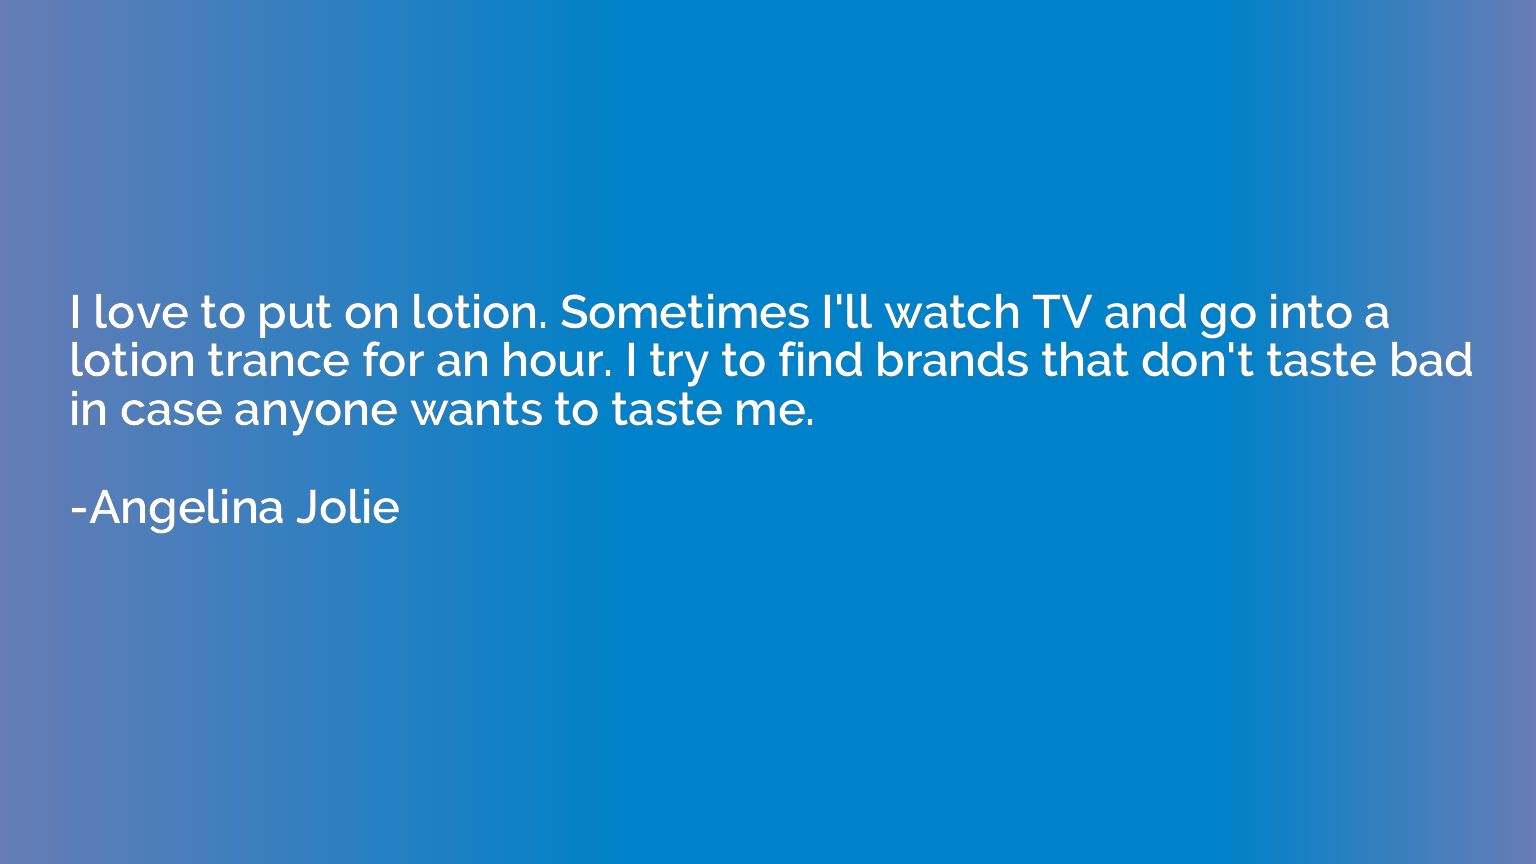 I love to put on lotion. Sometimes I'll watch TV and go into